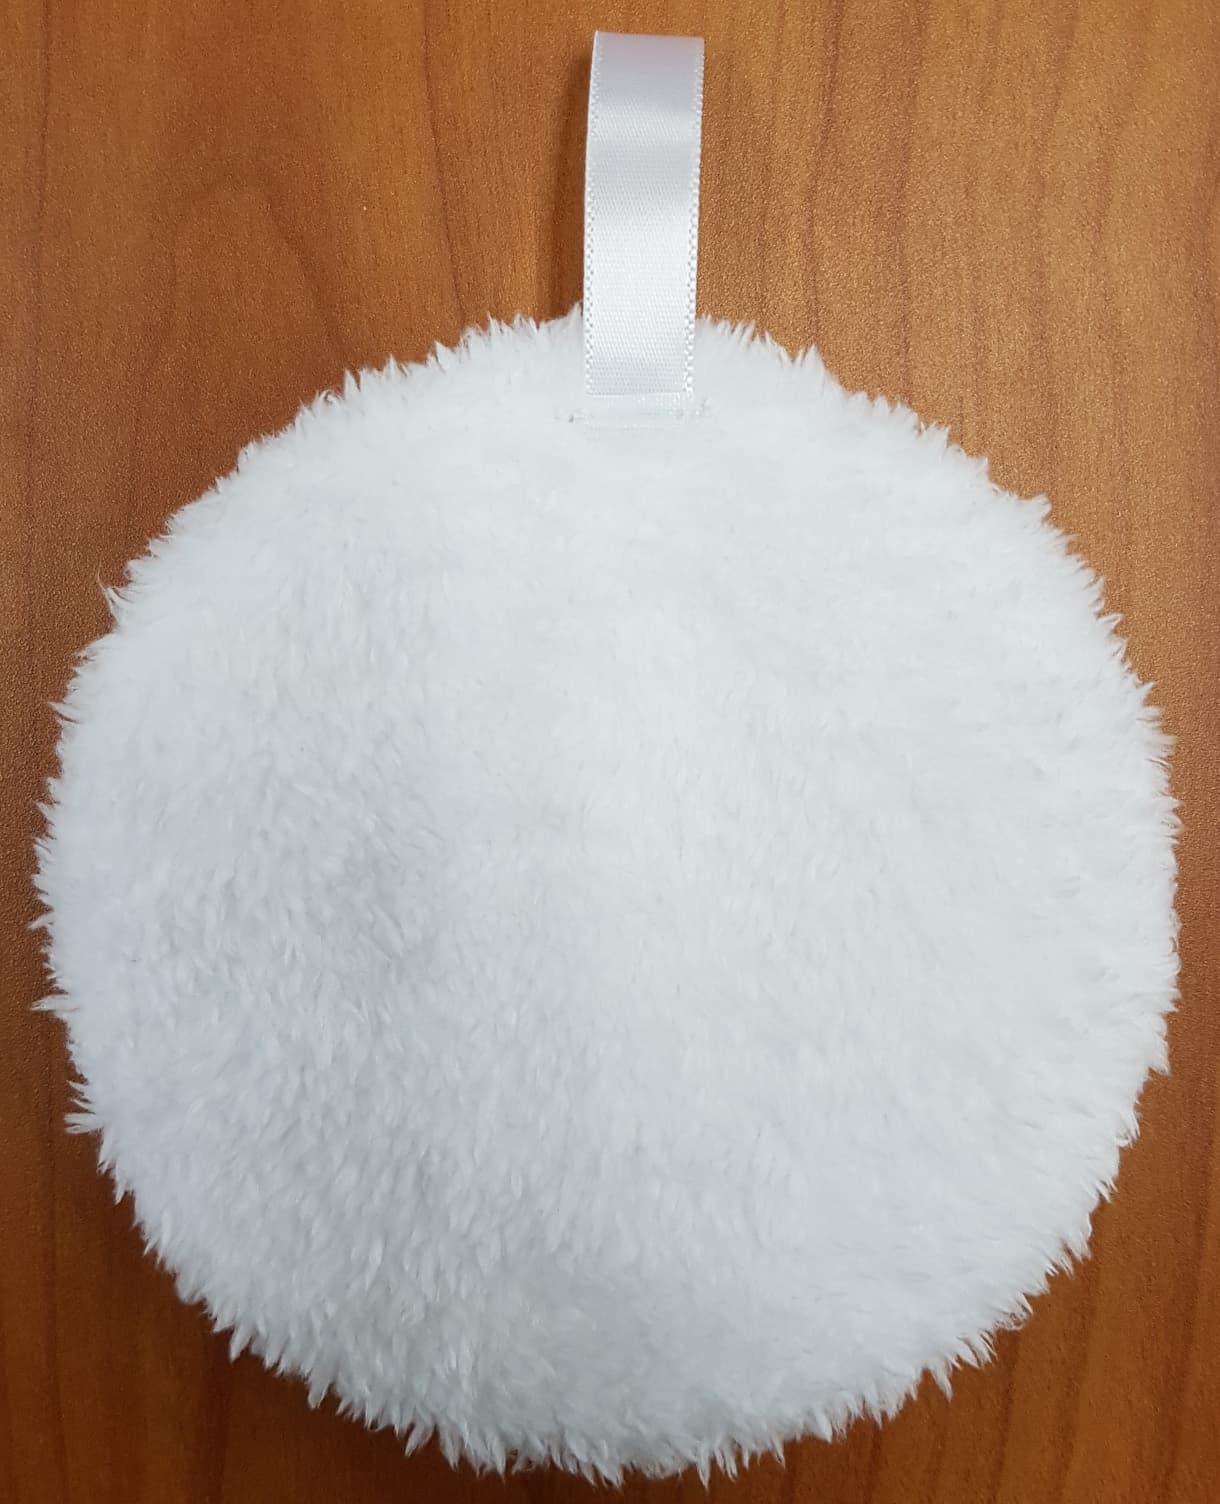 Cleansing microfiber puff _Beauty tools_